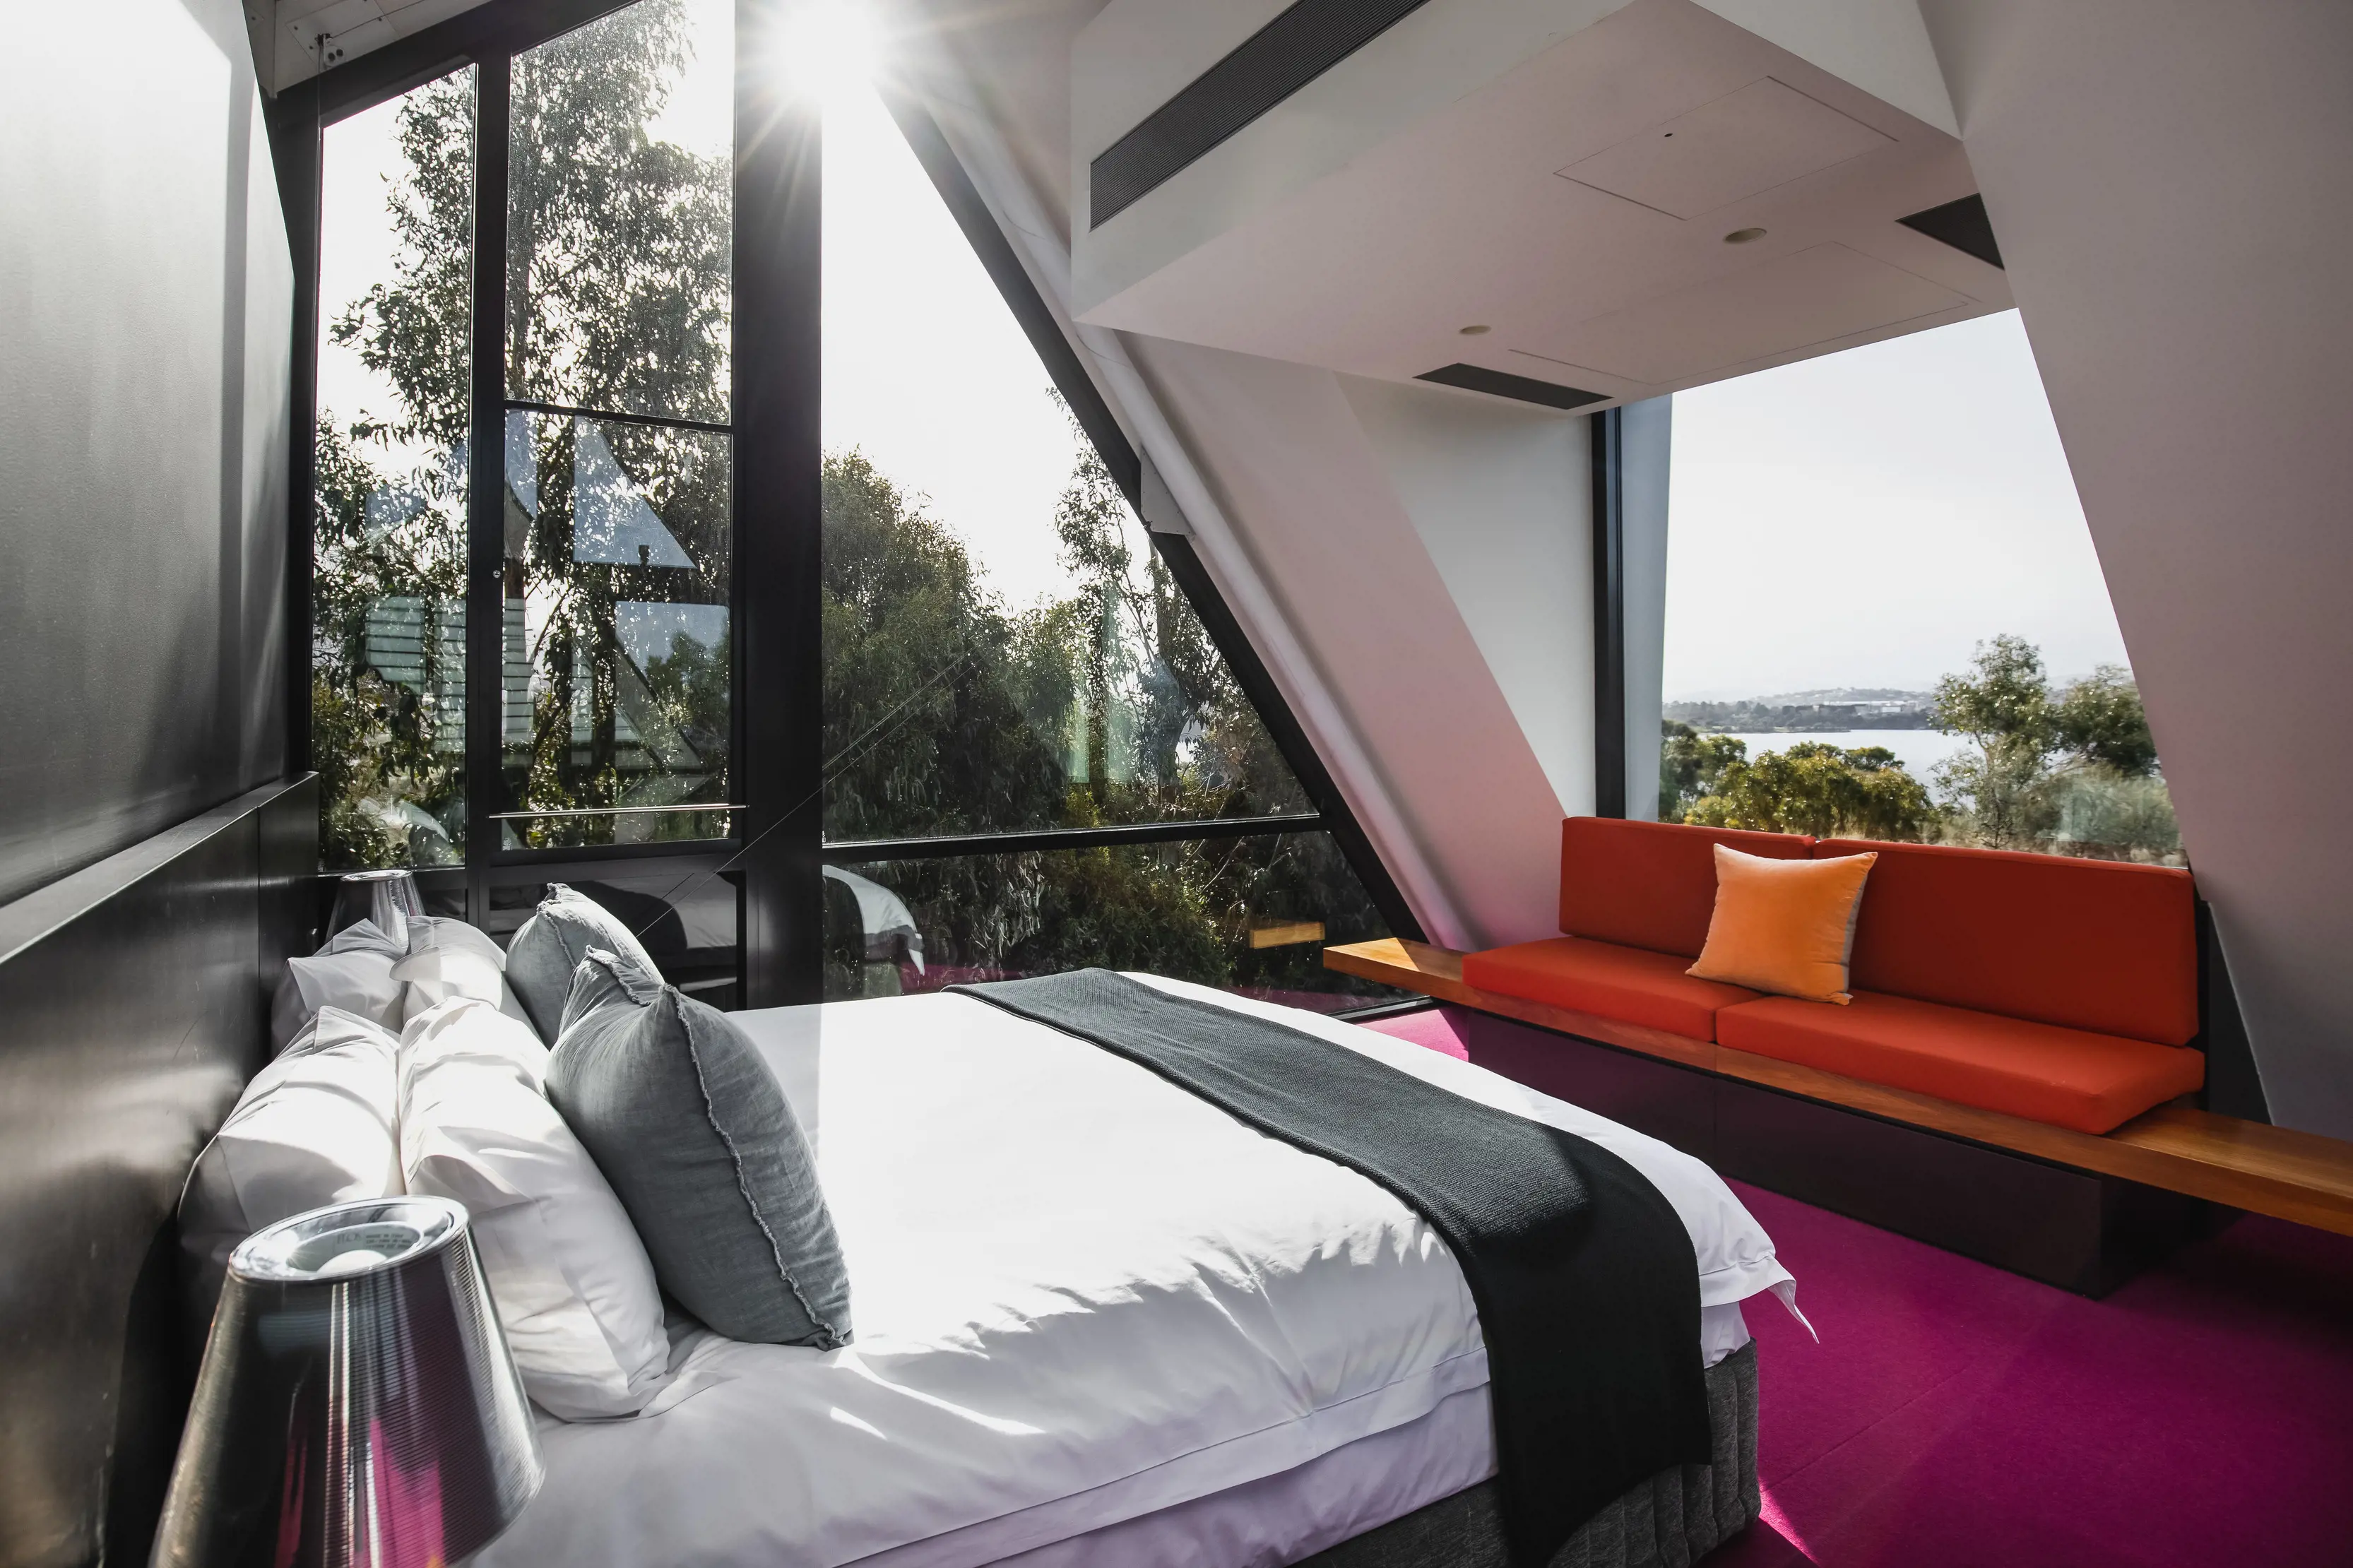 Interior of a bedroom with a bed, orange sofa and water views at Walter Pavilion, MONA Pavilions.